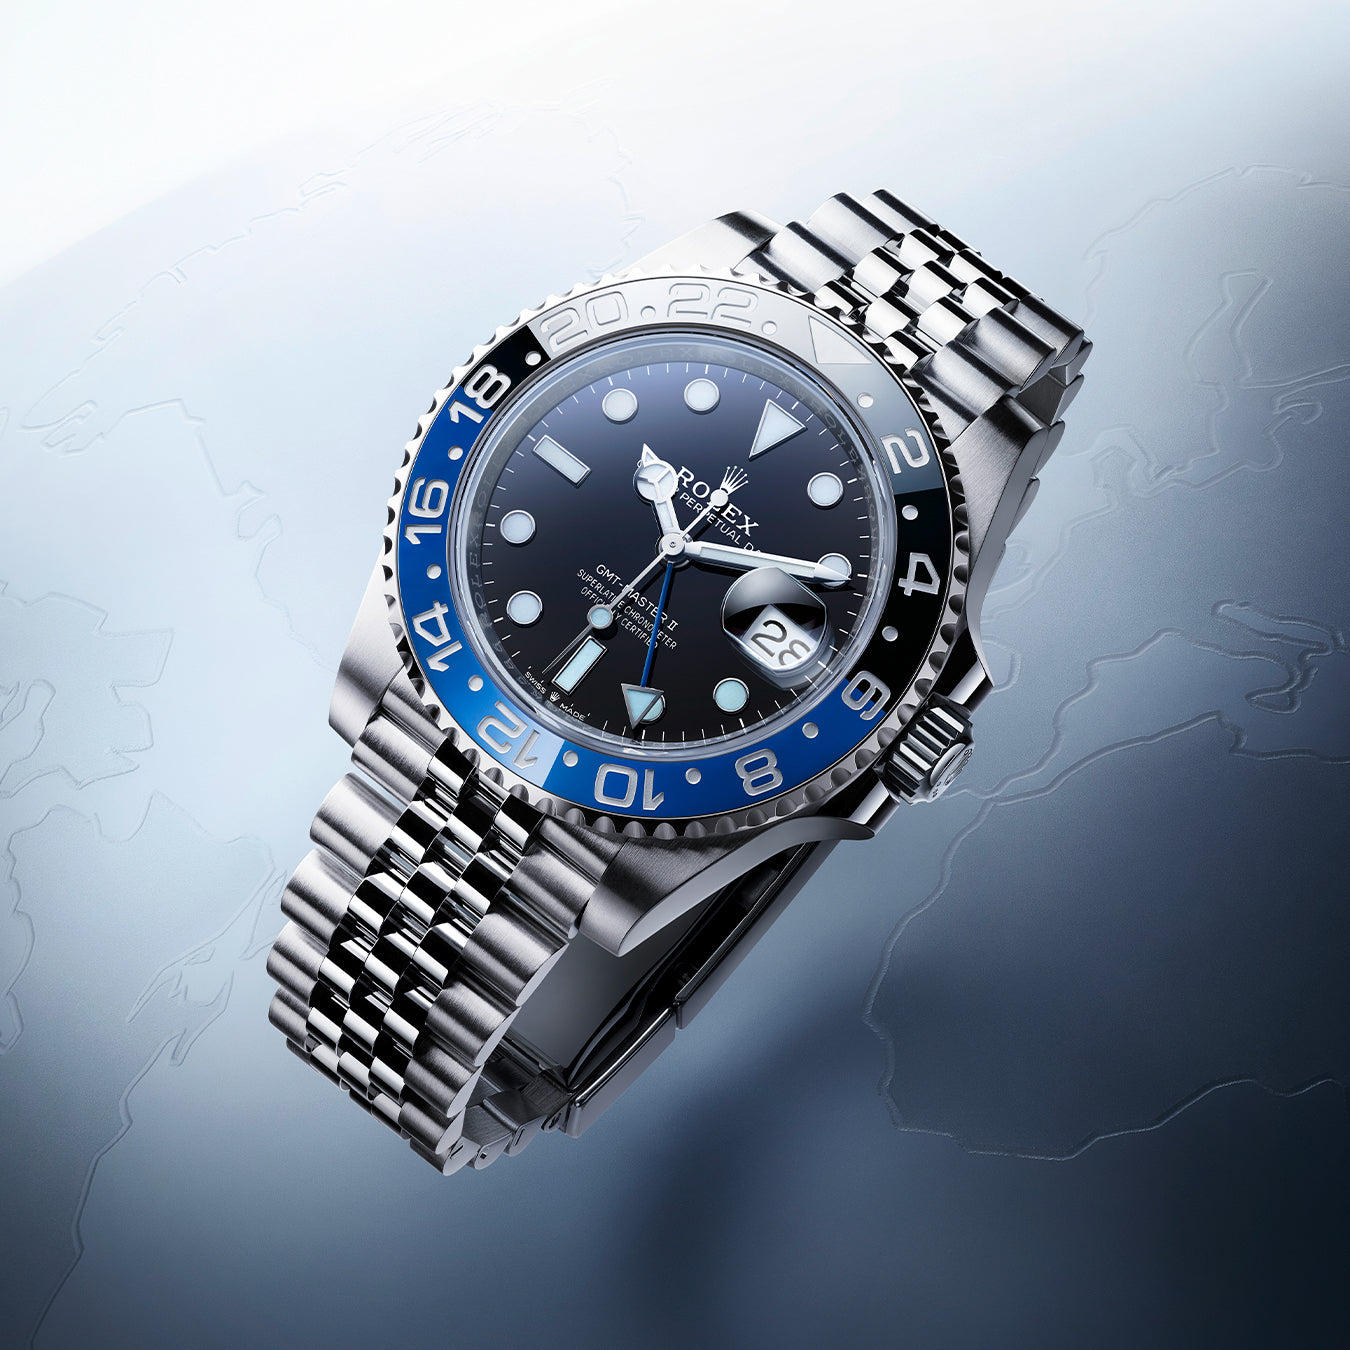 Rolex Oyster Perpetual GMT-Master II on Blue Background